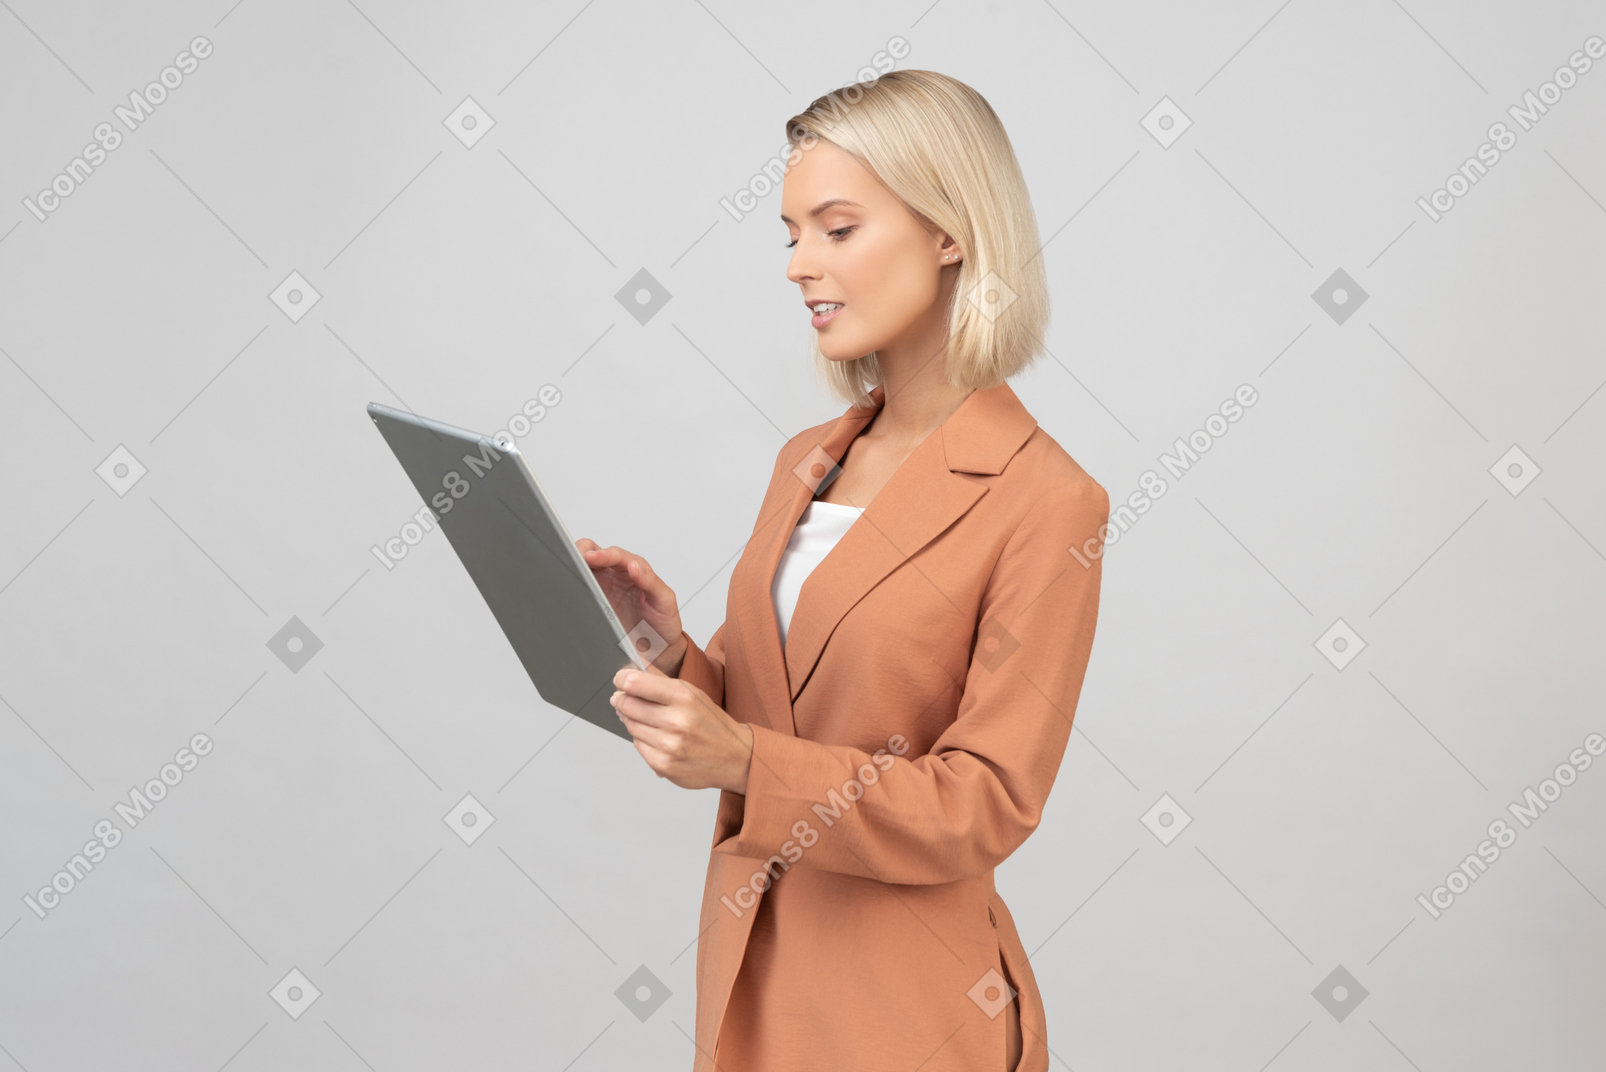 Young beautiful woman holding a digital tablet